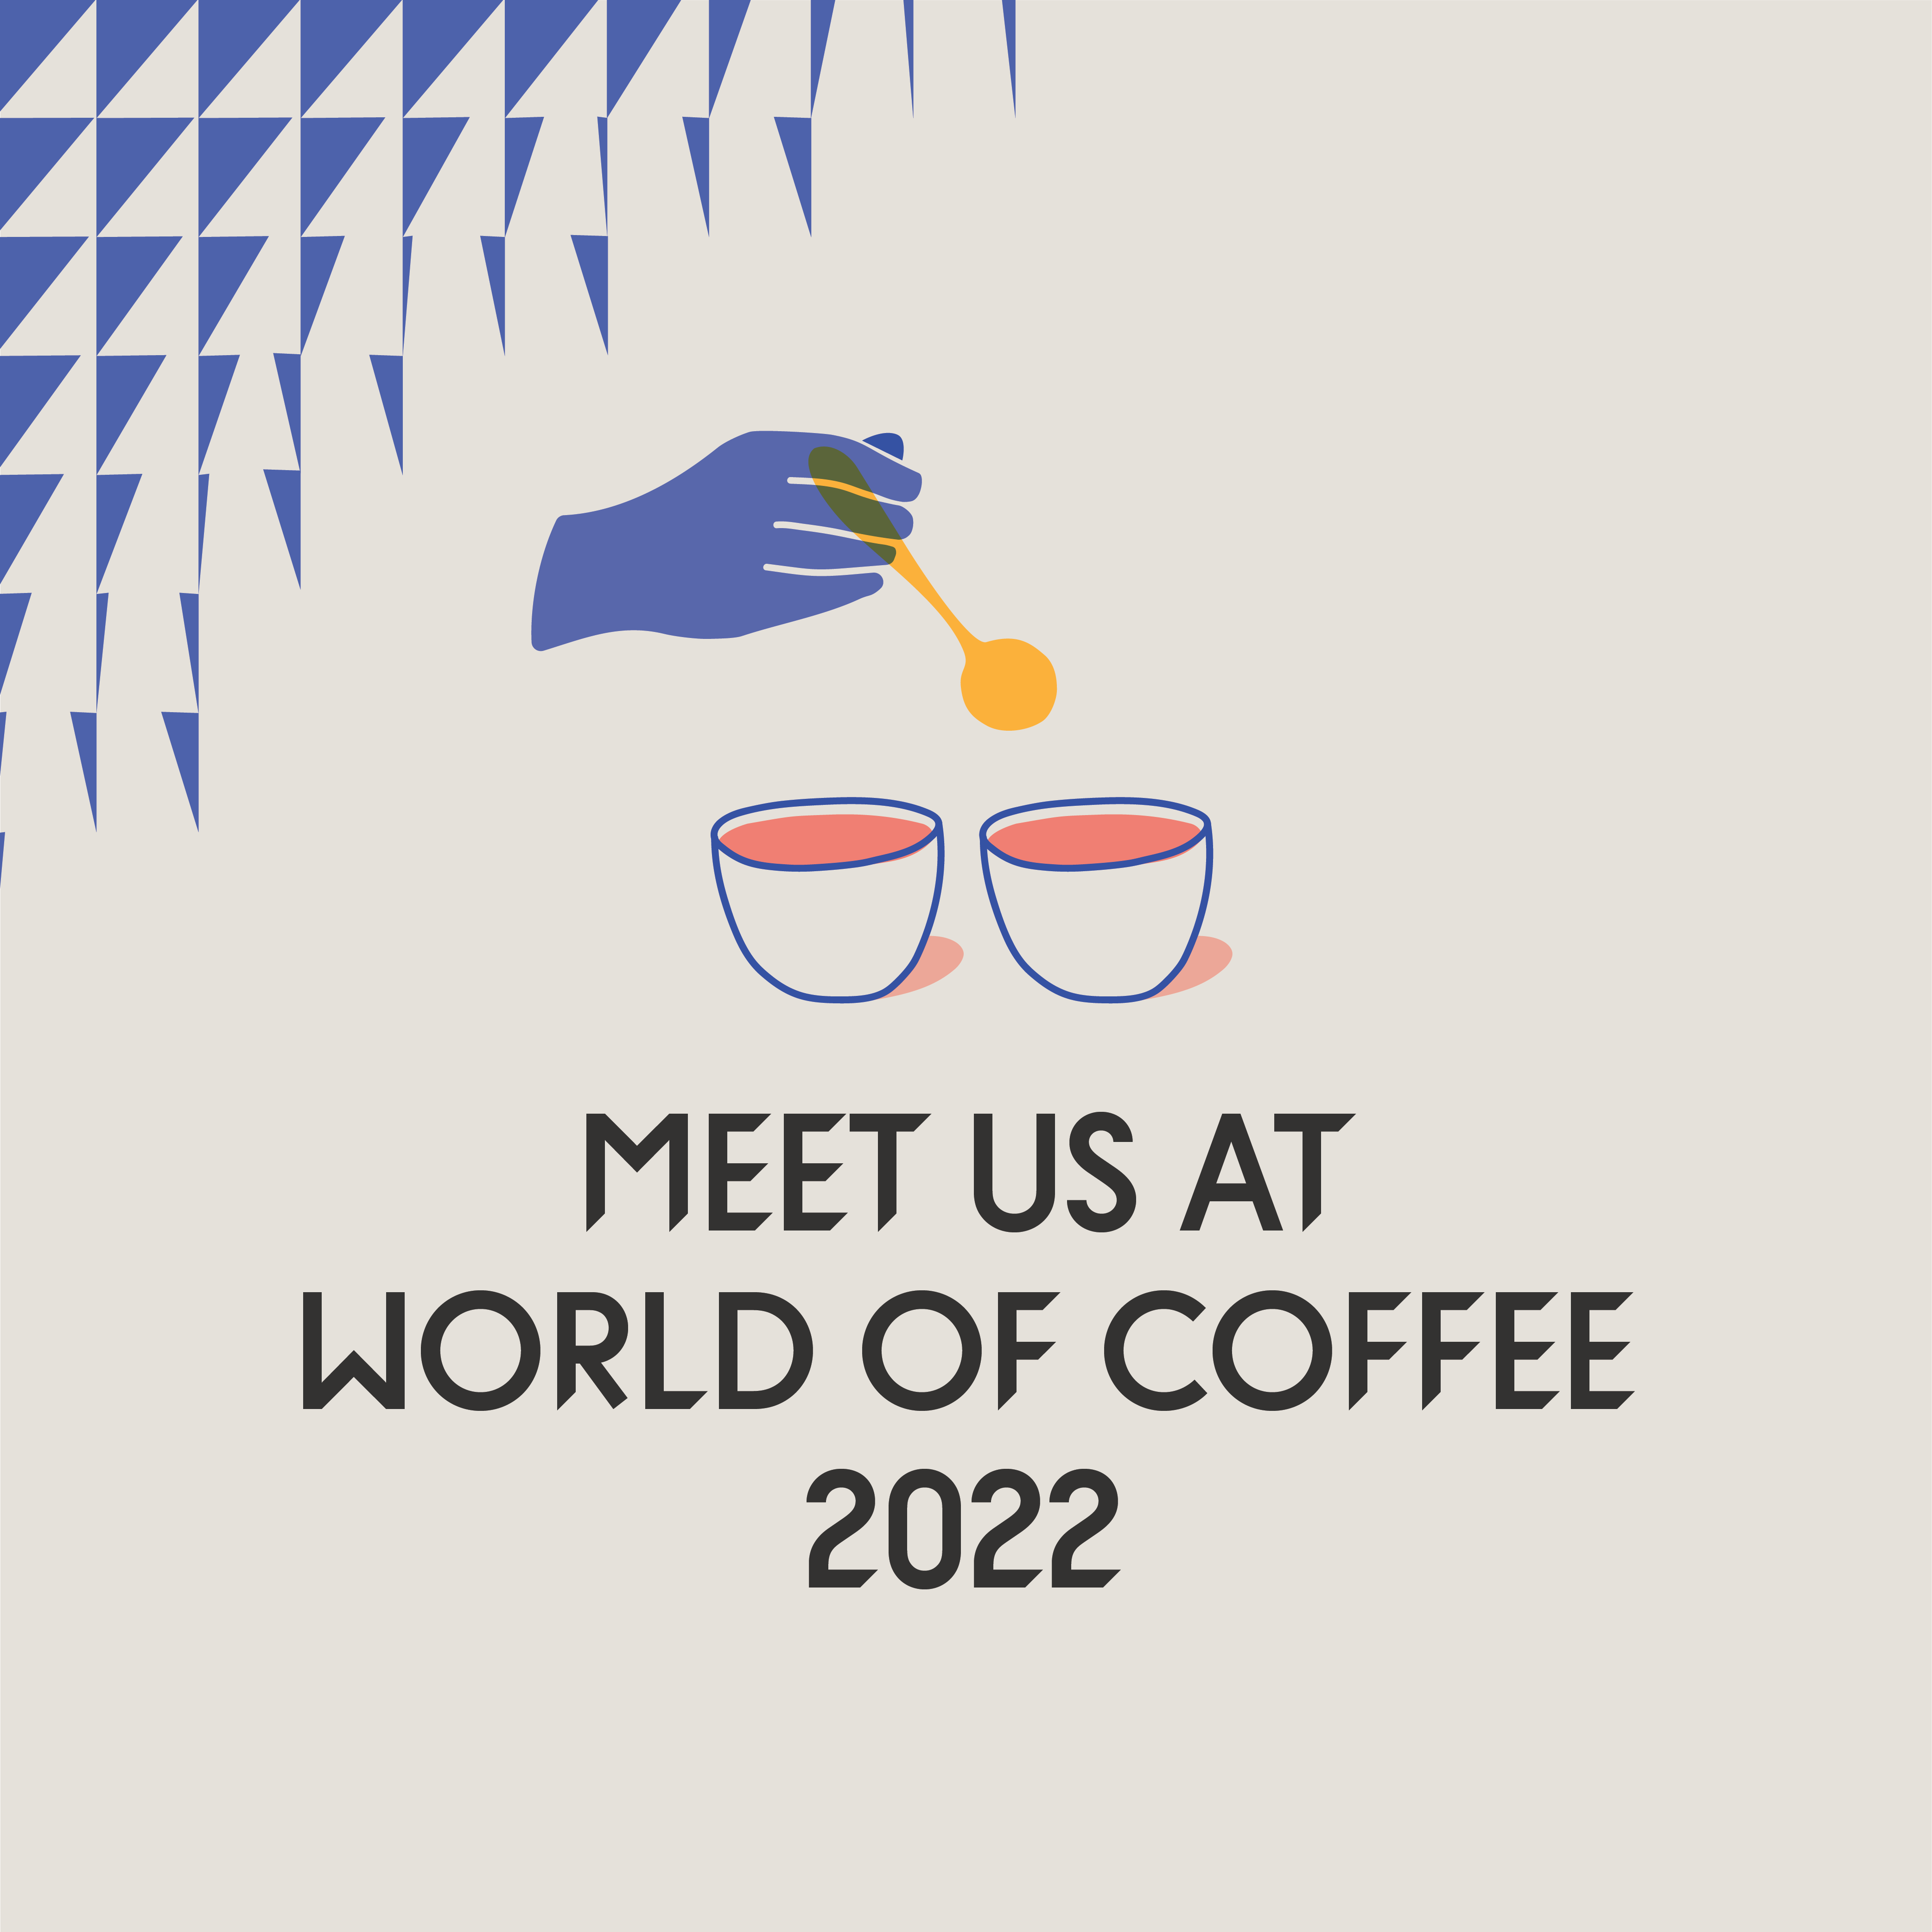 Meet us at World of Coffee 2022 in Milan